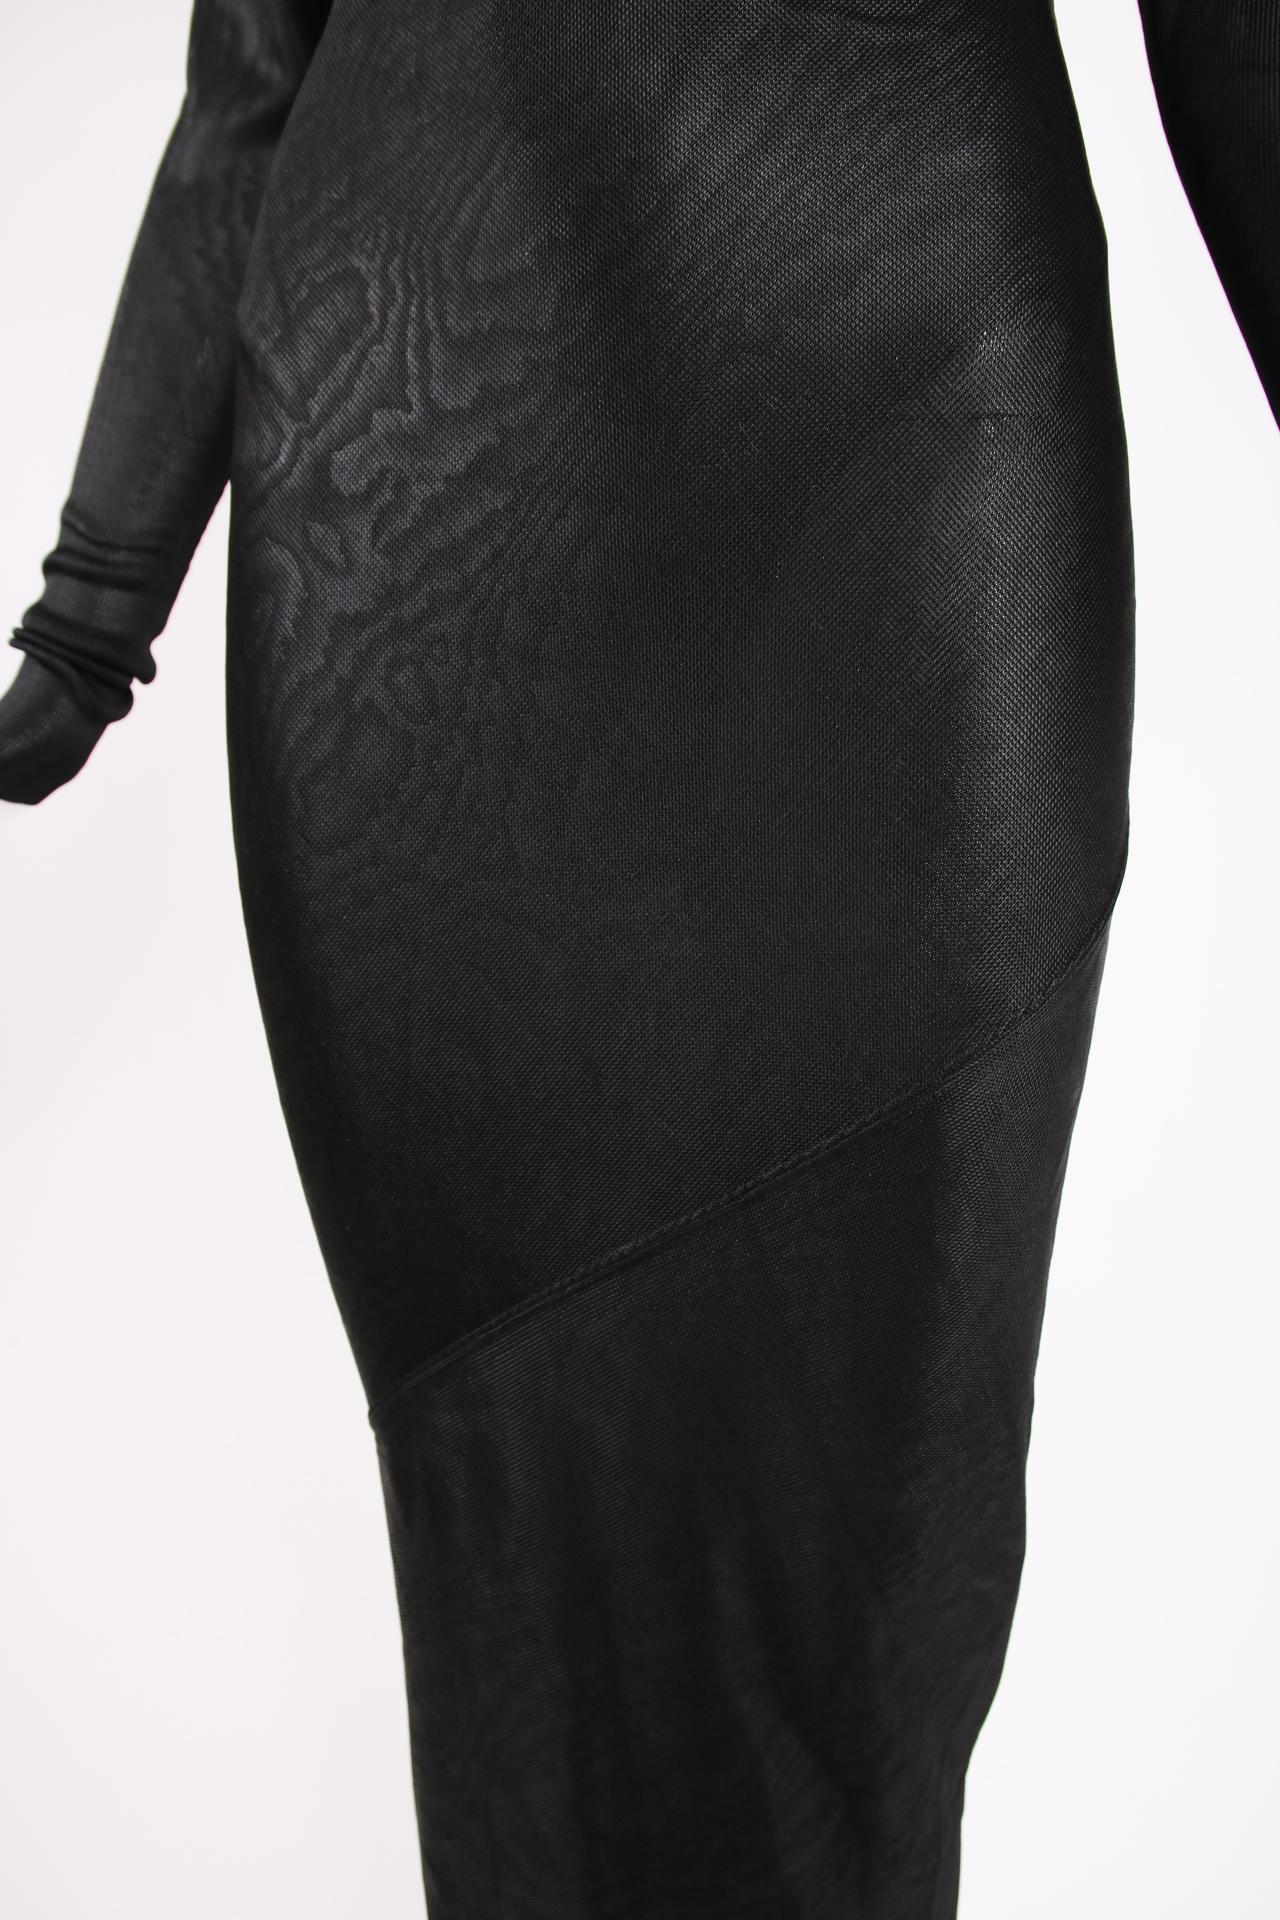 Iconic Azzedine Alaia Black Bodycon Trained Gown, 1986 For Sale 1